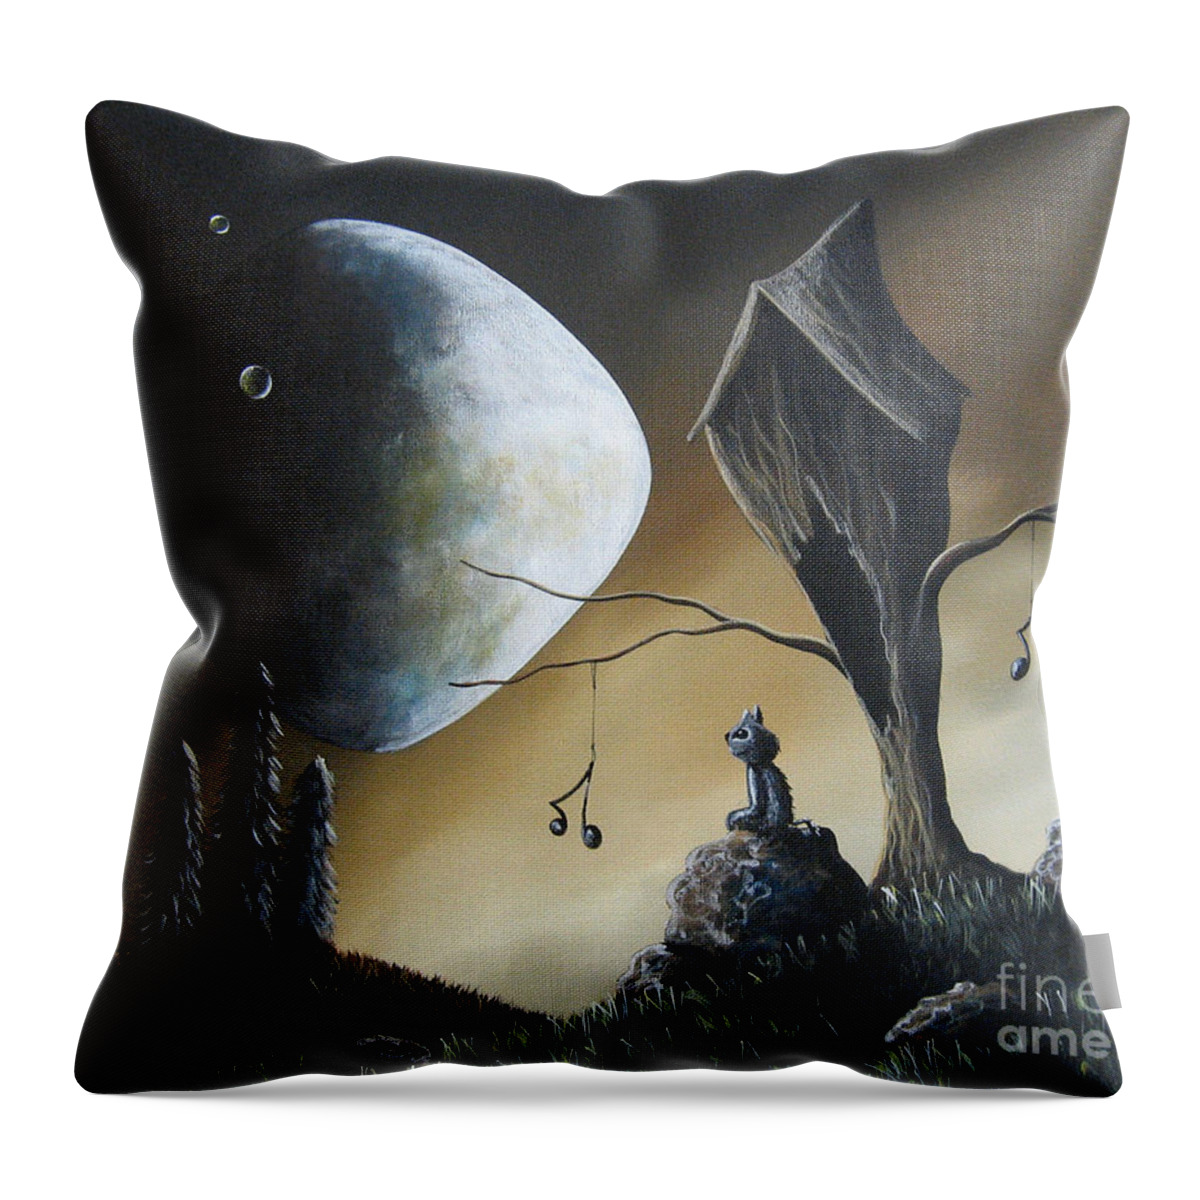 Cats Throw Pillow featuring the painting Even Cats Have Strange Dreams by Shawna Erback by Moonlight Art Parlour